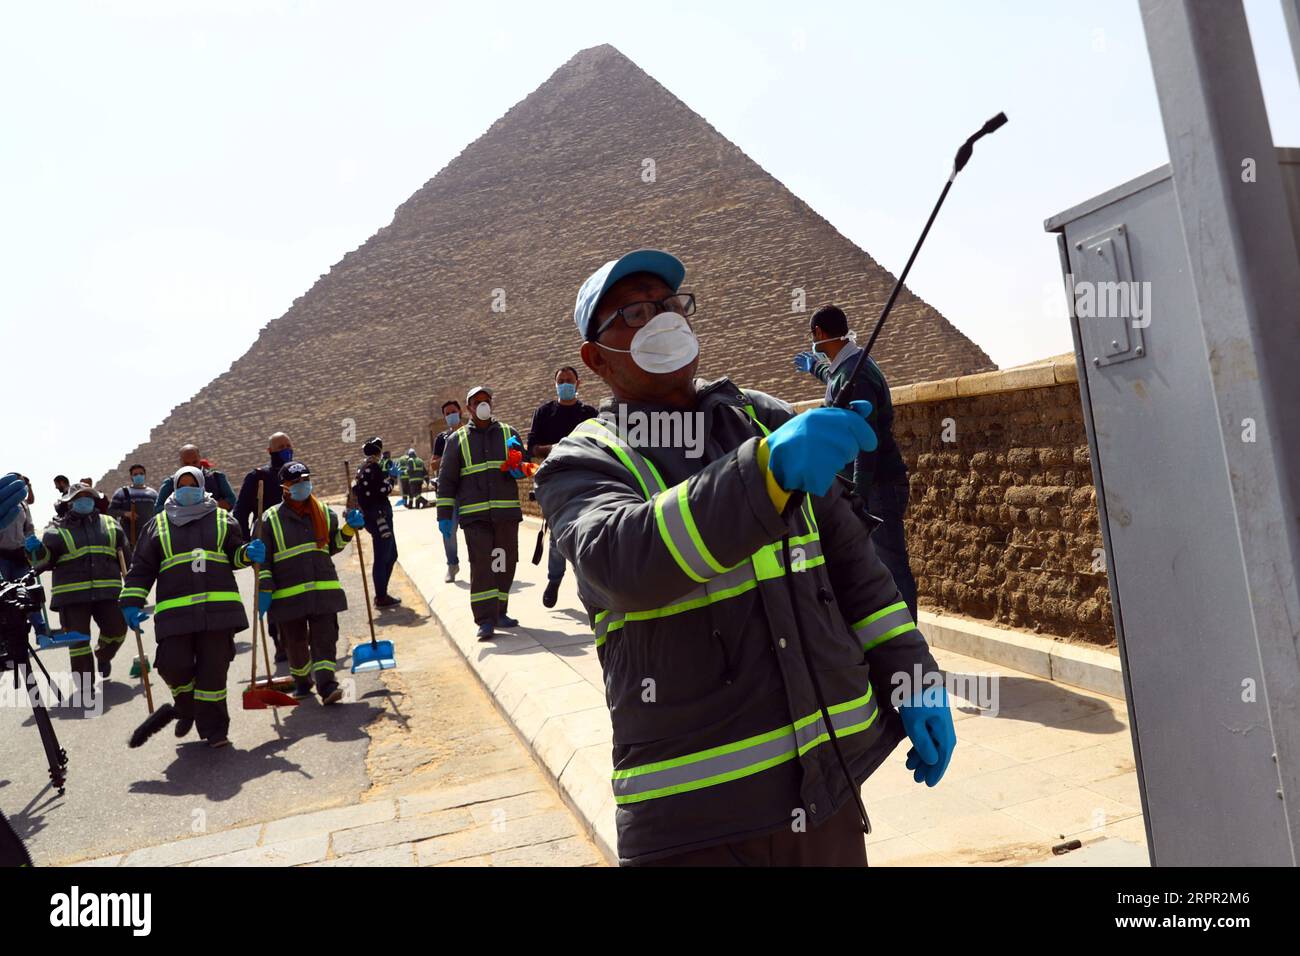 200325 -- GIZA, March 25, 2020 Xinhua -- A staff member disinfects near the Pyramids in Giza, Egypt, March 25, 2020. Egypt announced on Tuesday that one COVID-19 case died and 36 new cases were detected, bringing the total number of cases in the country to 402. Xinhua/Ahmed Gomaa EGYPT-GIZA-PYRAMIDS-DISINFECTION PUBLICATIONxNOTxINxCHN Stock Photo